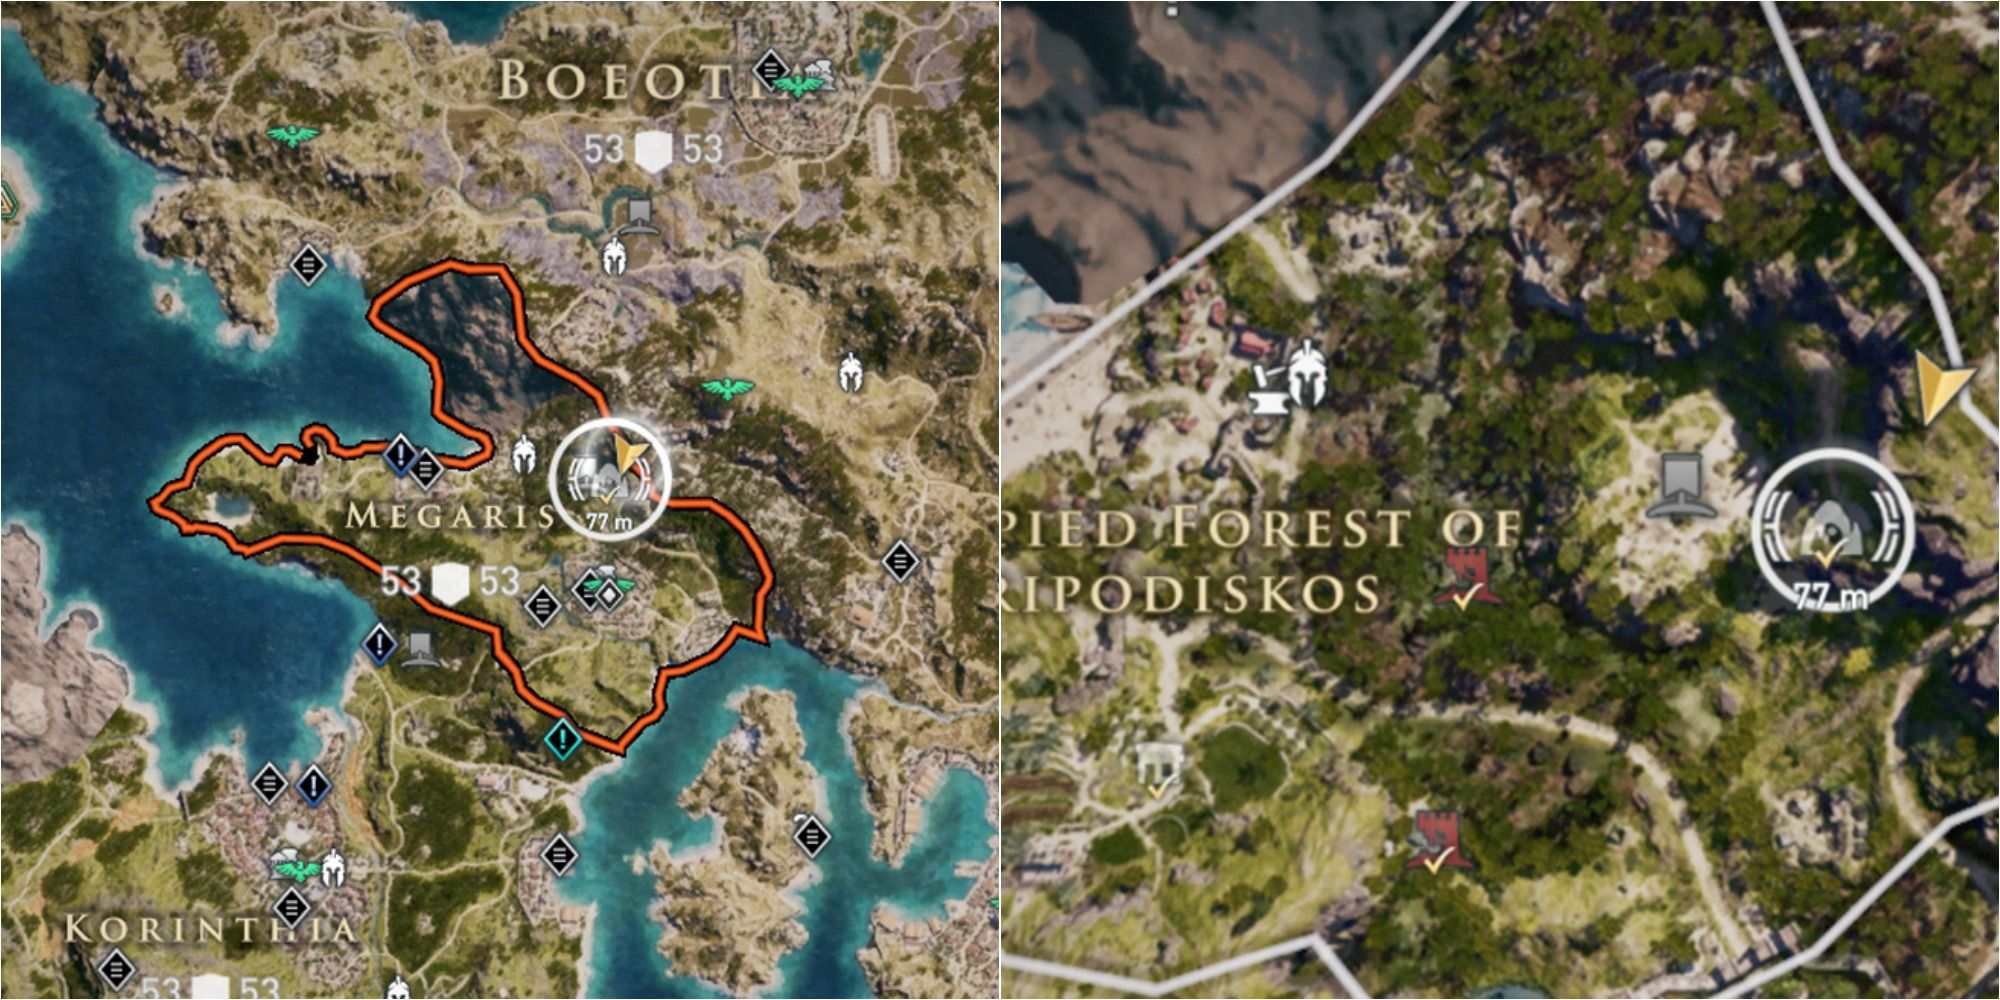 Assassin's Creed Odyssey Split Image Showing Happy Hour Cave Location